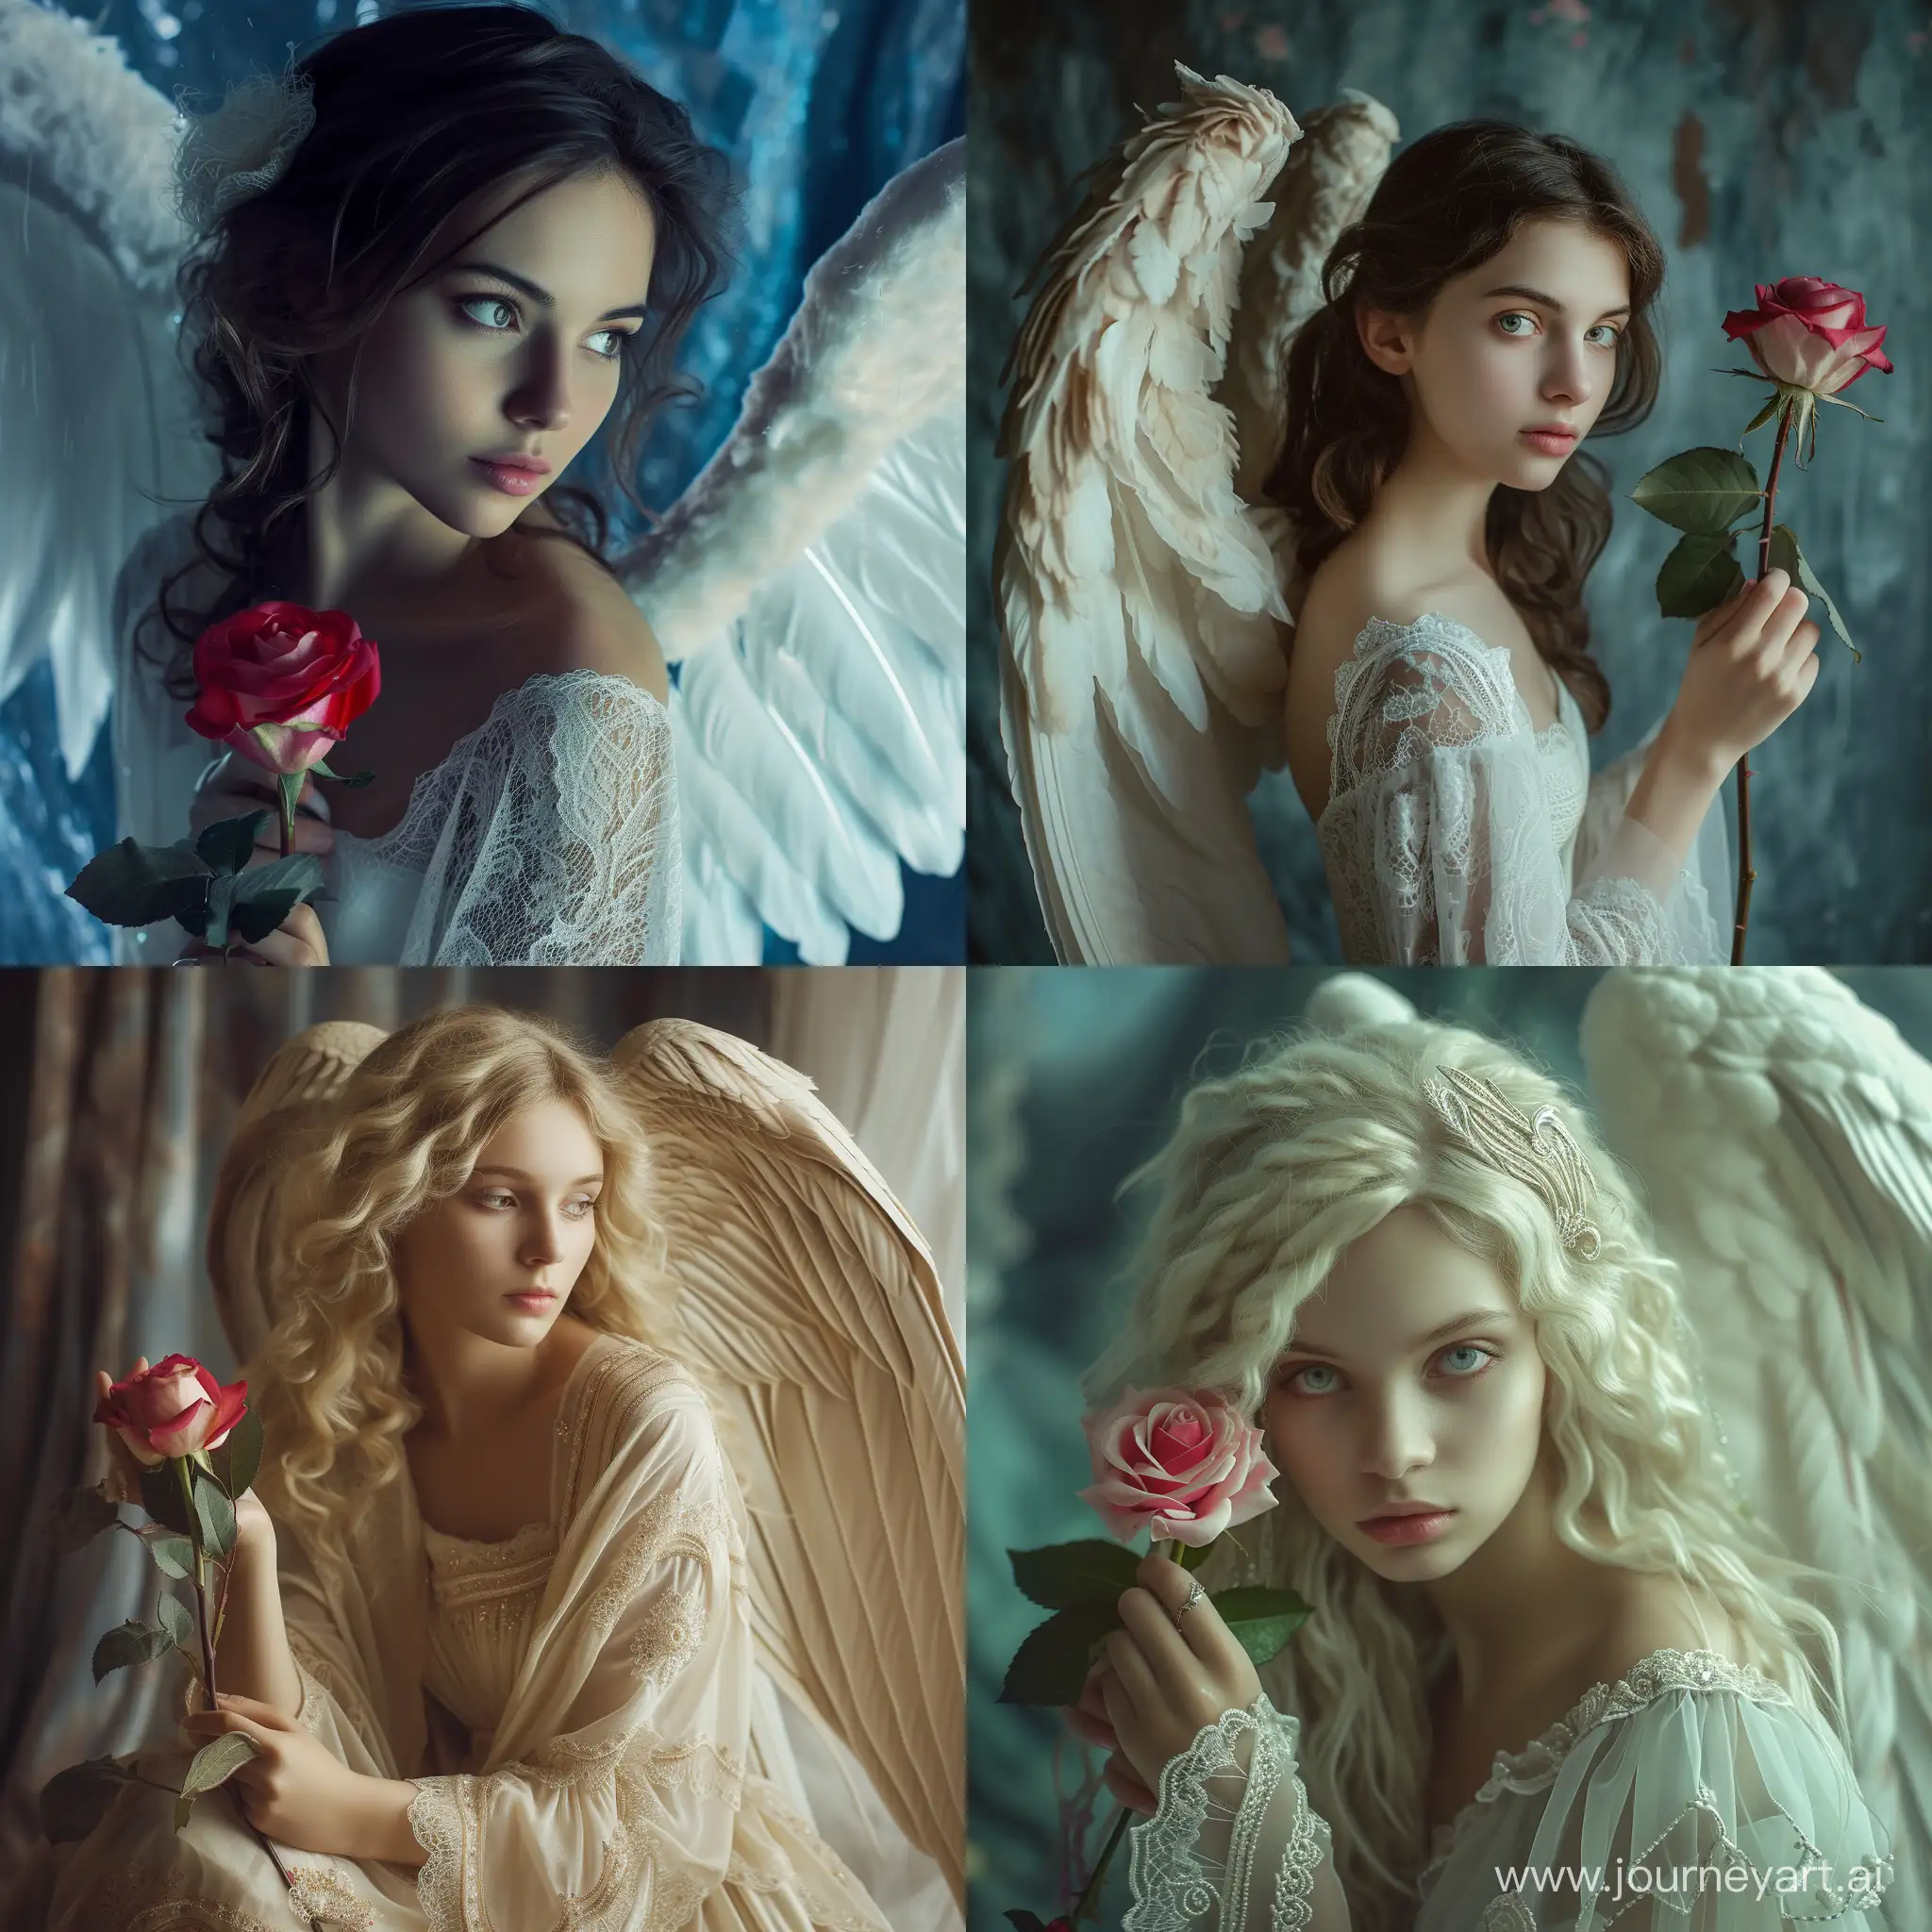 generate a 20 years old angel image with holding a rose in hand , portrait 